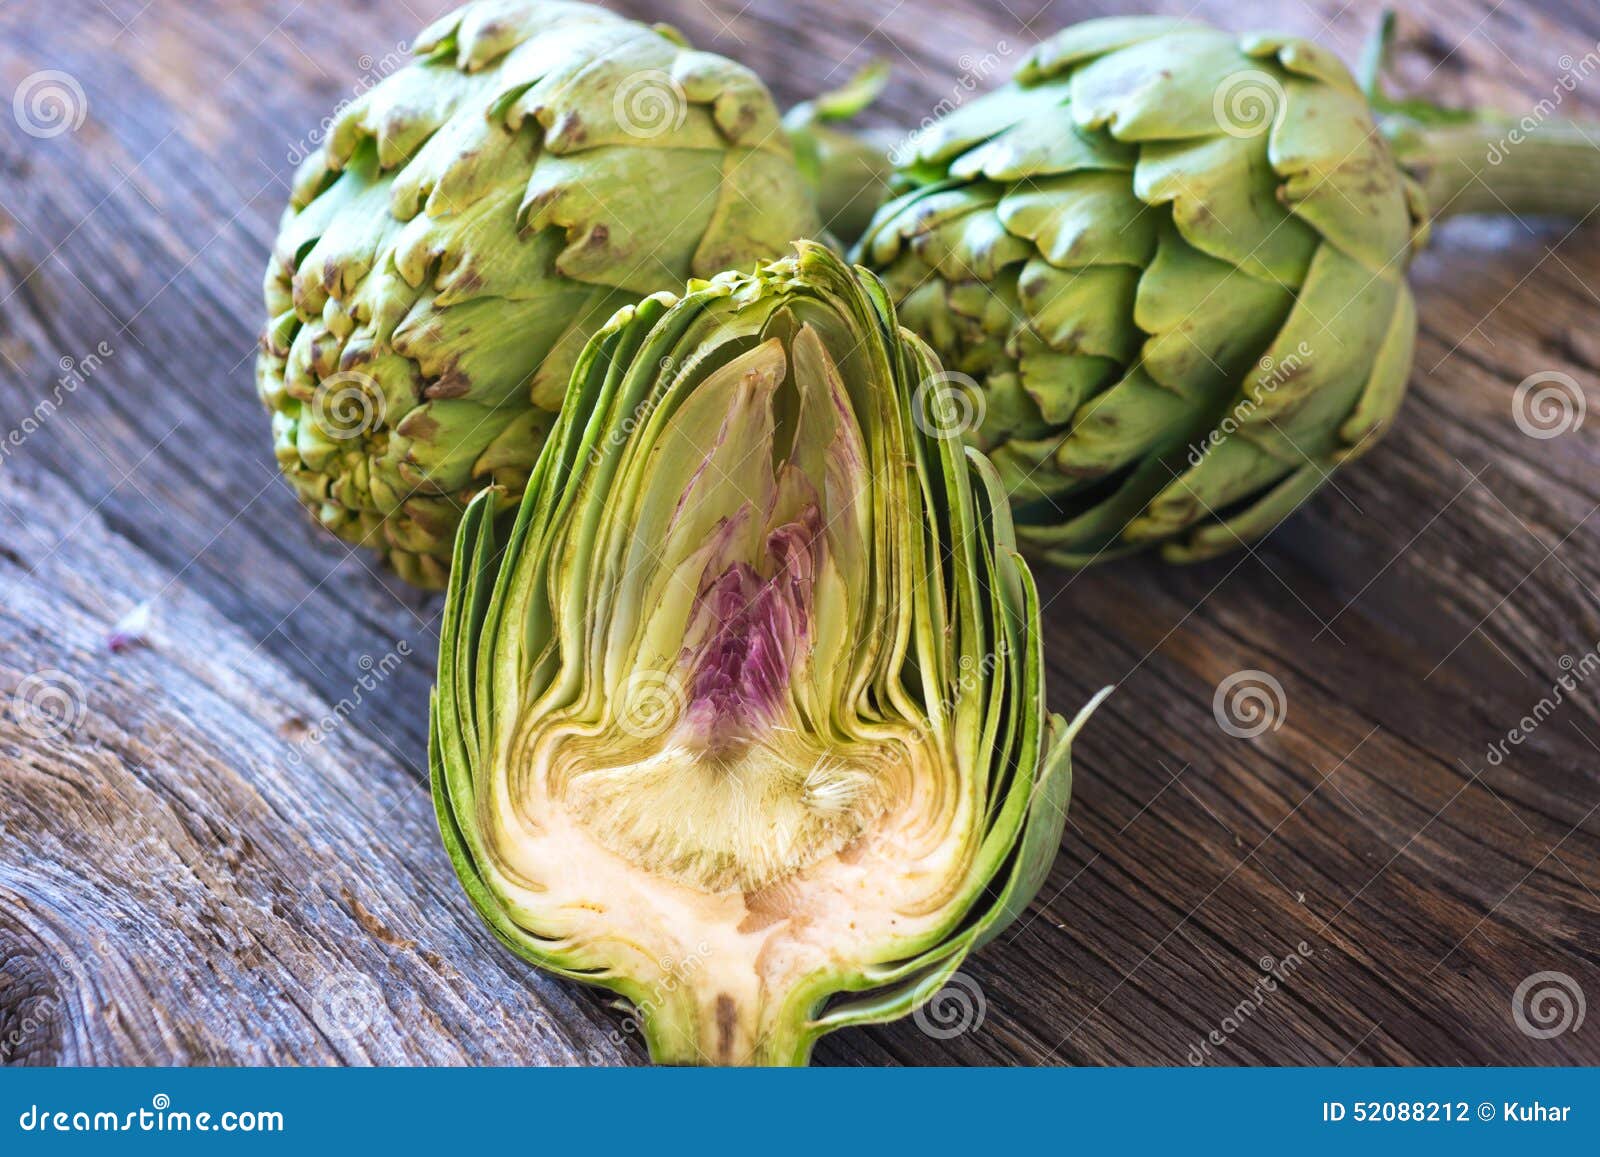 Fresh artichokes on rustic old wooden table.